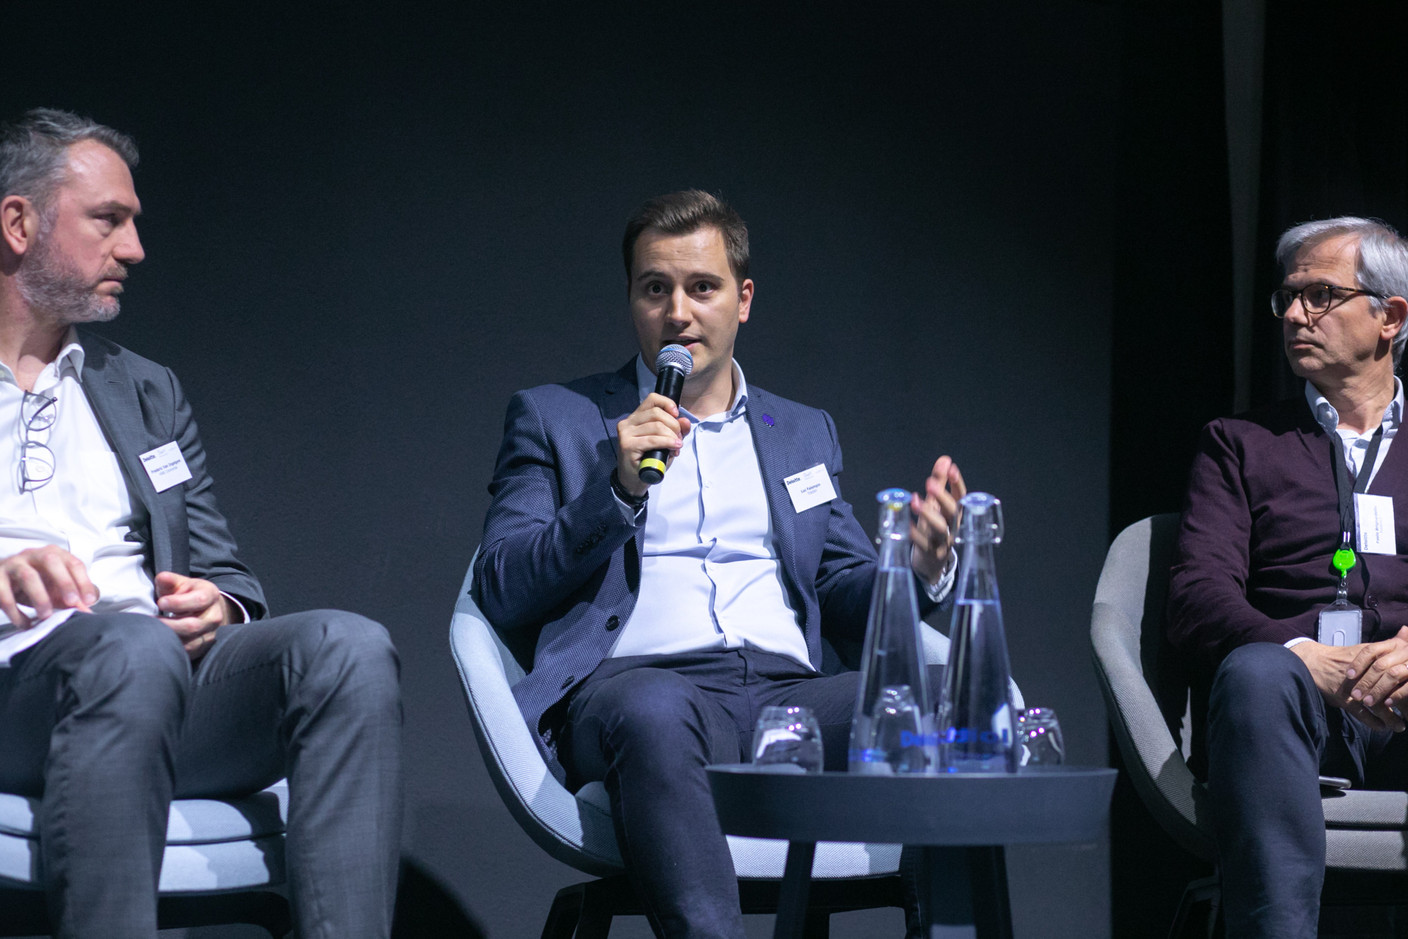 Fred Van Ingelgom of HSBC, Luc Falempin of Tokeny and Paolo Brignardello of FundDLT seen on the “Digital Assets: What lies ahead of us within European securities landscape?” panel discussion at Deloitte’s digital assets conference, 20 April 2023. Photo: Matic Zorman / Maison Moderne